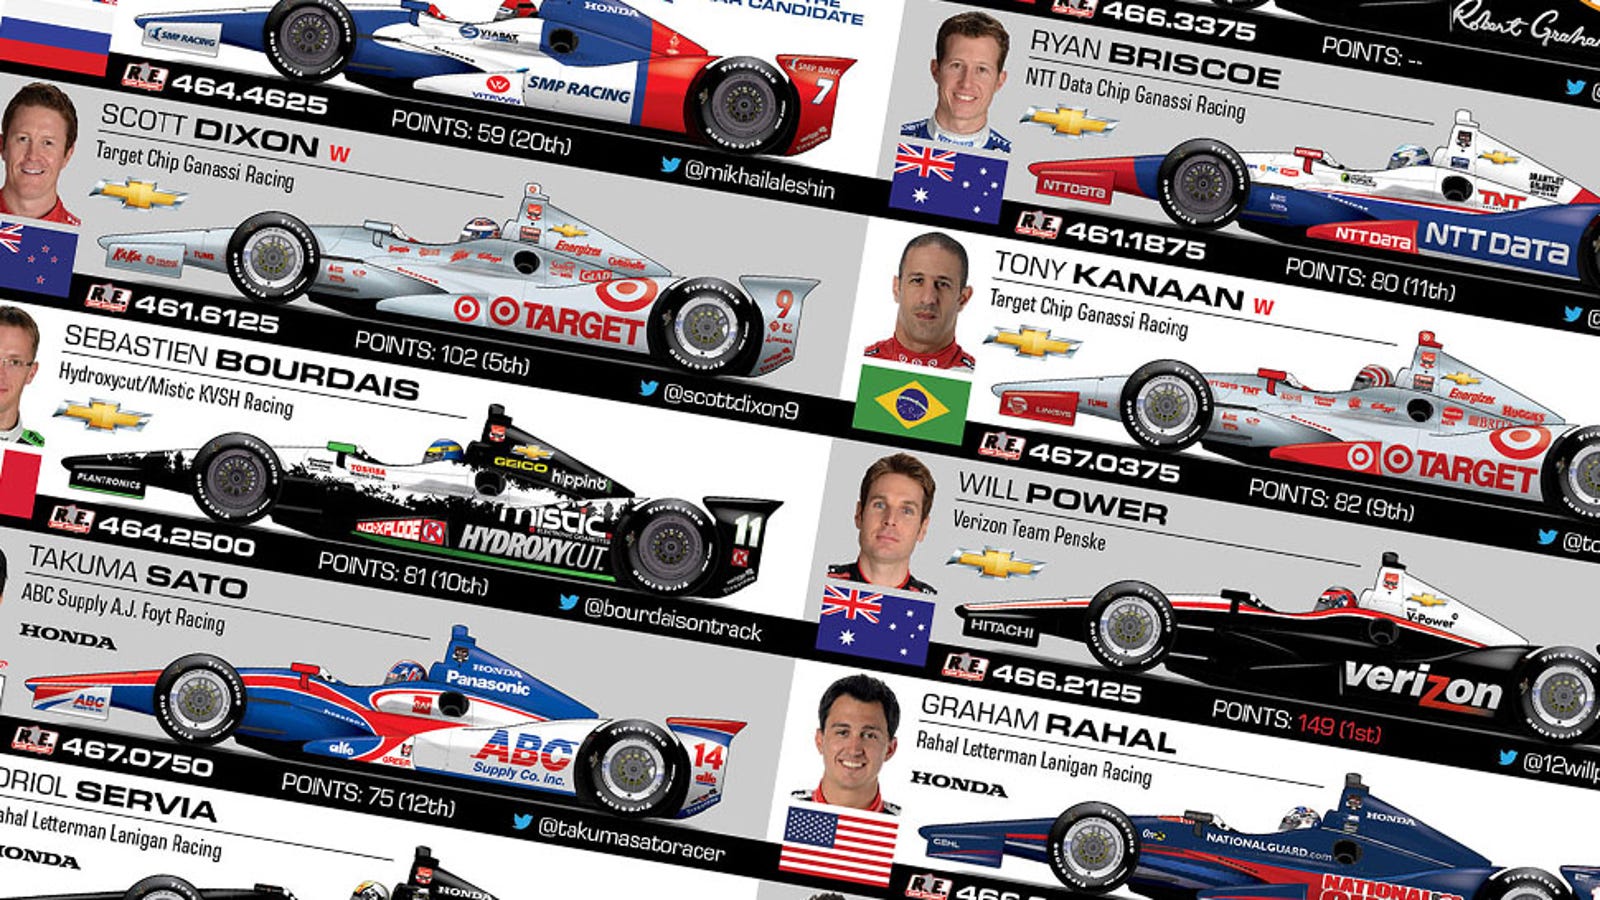 Here's Your Spotter's Guide For The Indianapolis 500